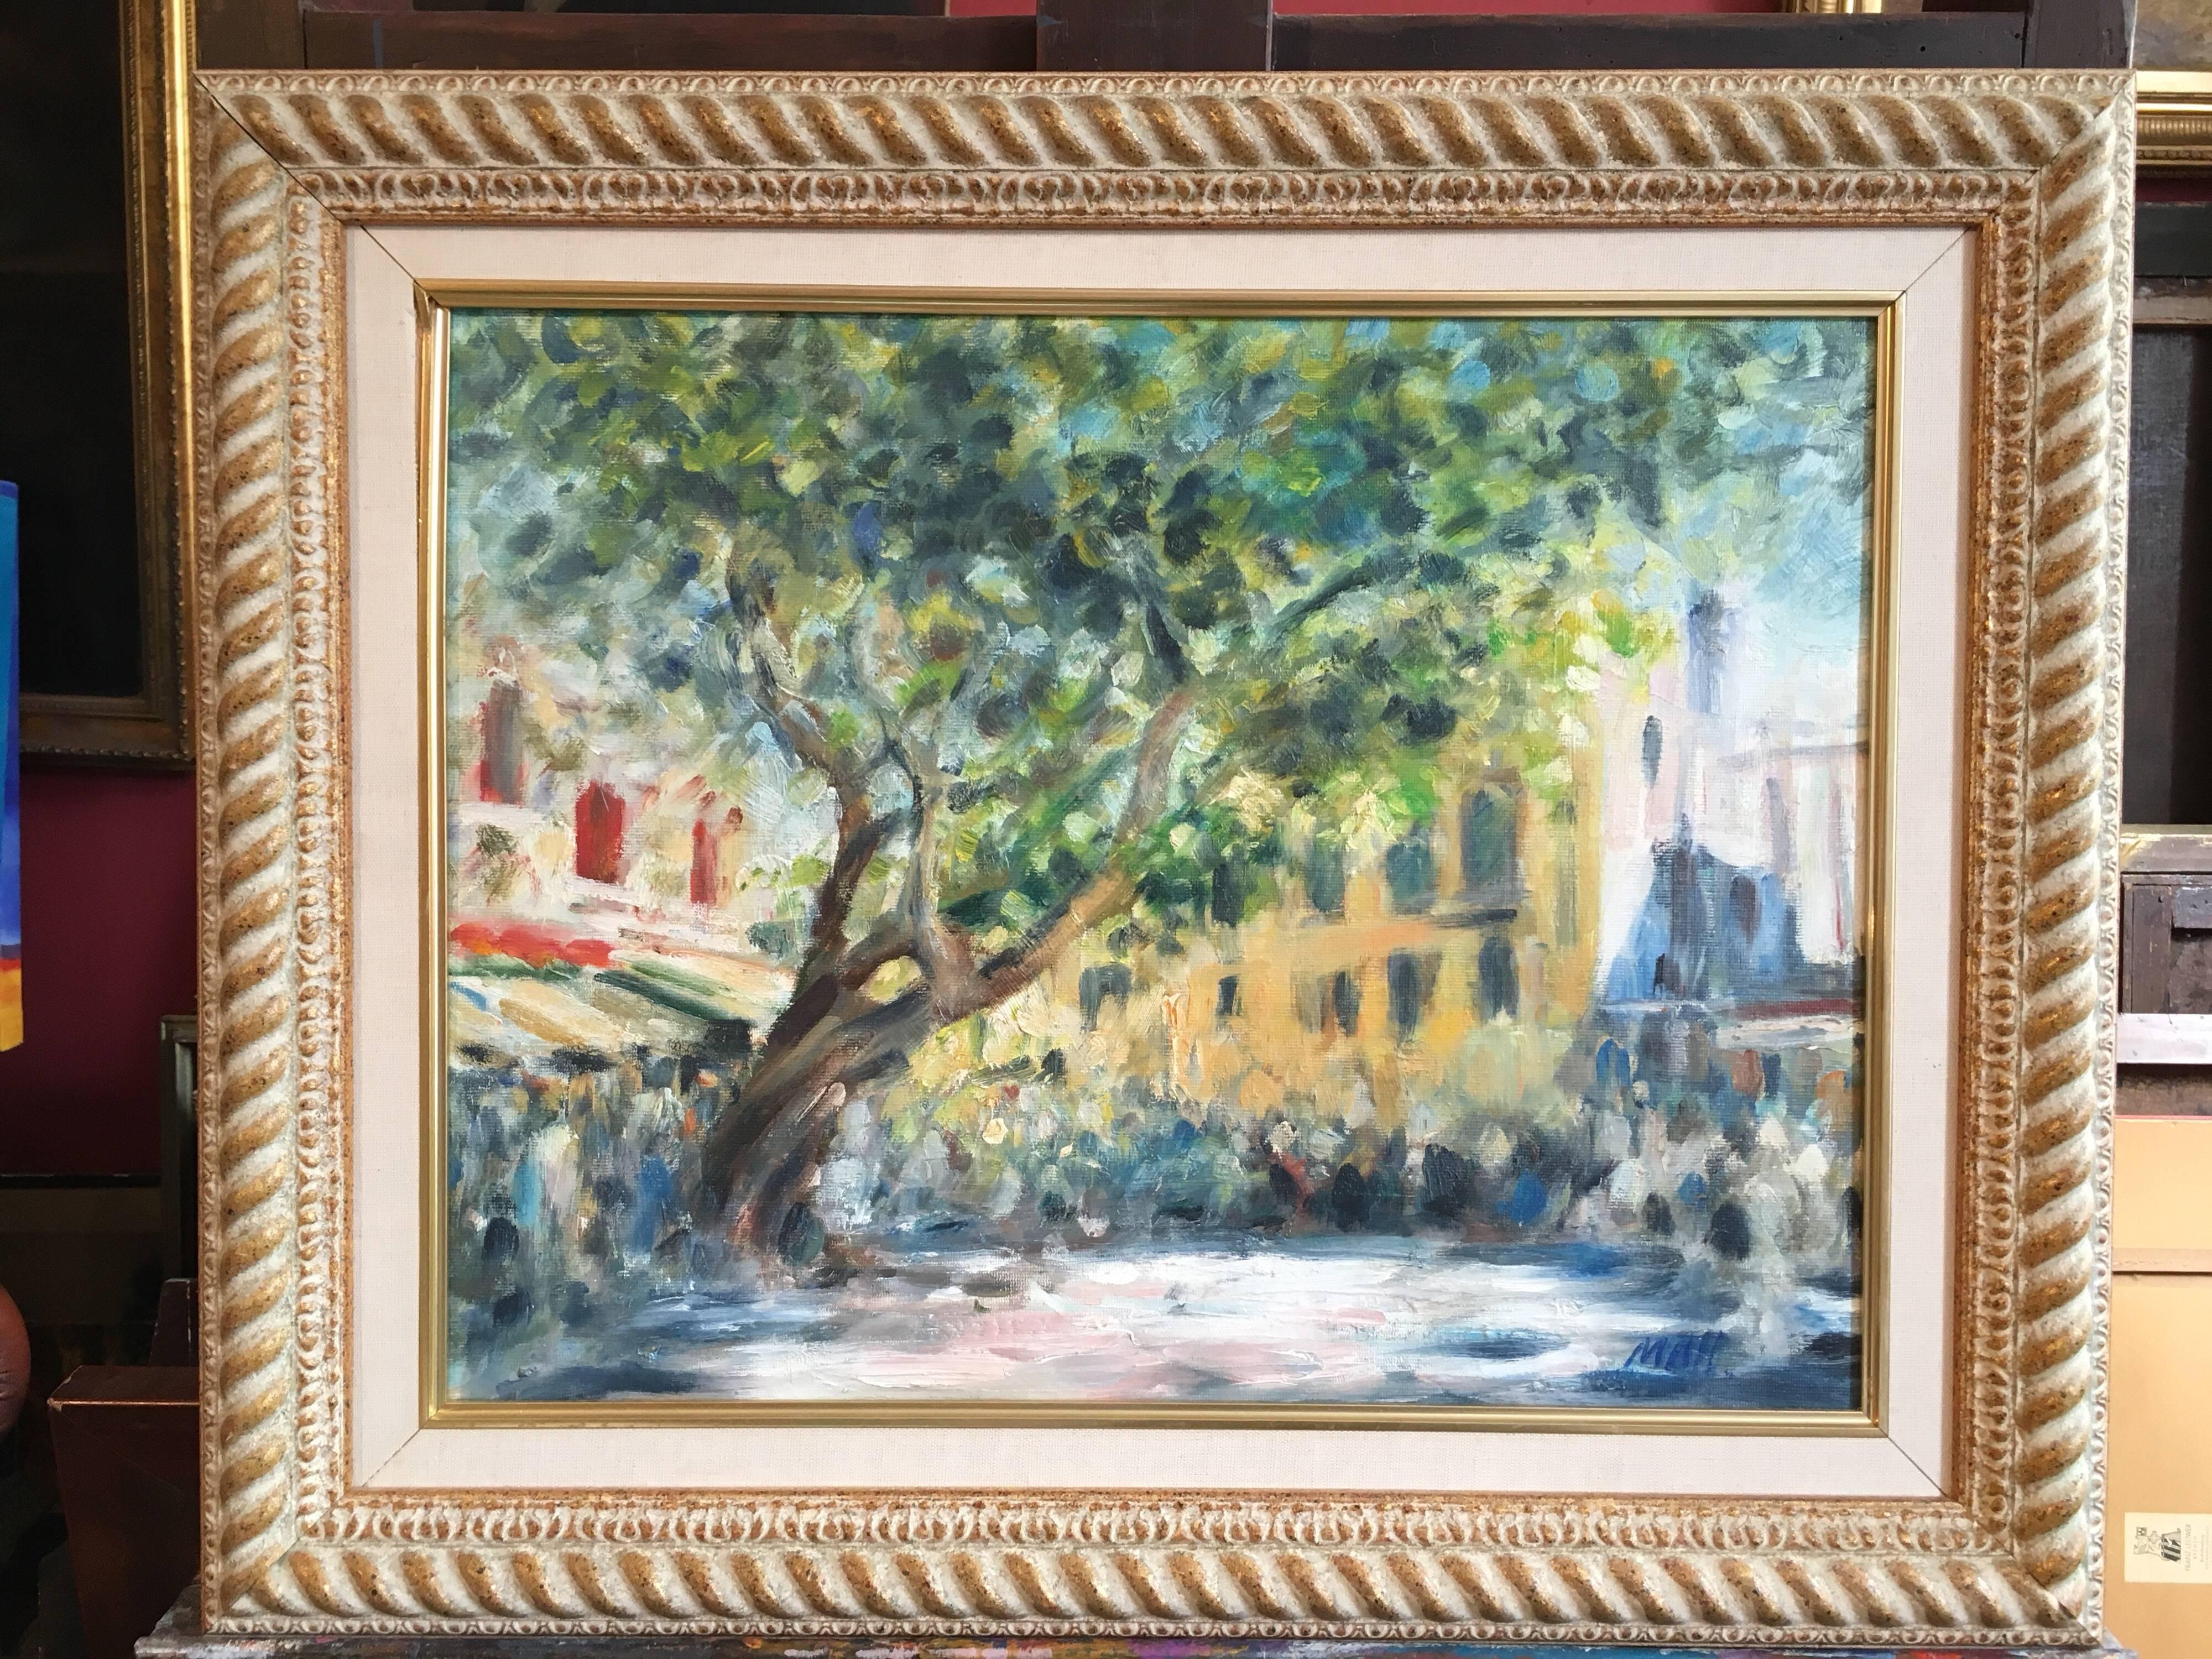 Impressionist Oil of a French Market Day
Frnech School, 20th Century
Signed by the artist on the lower right hand corner
Oil painting on board, framed
Framed size: 19 x 23 inches

This is such a beautiful painting, capturing a busy day at a local